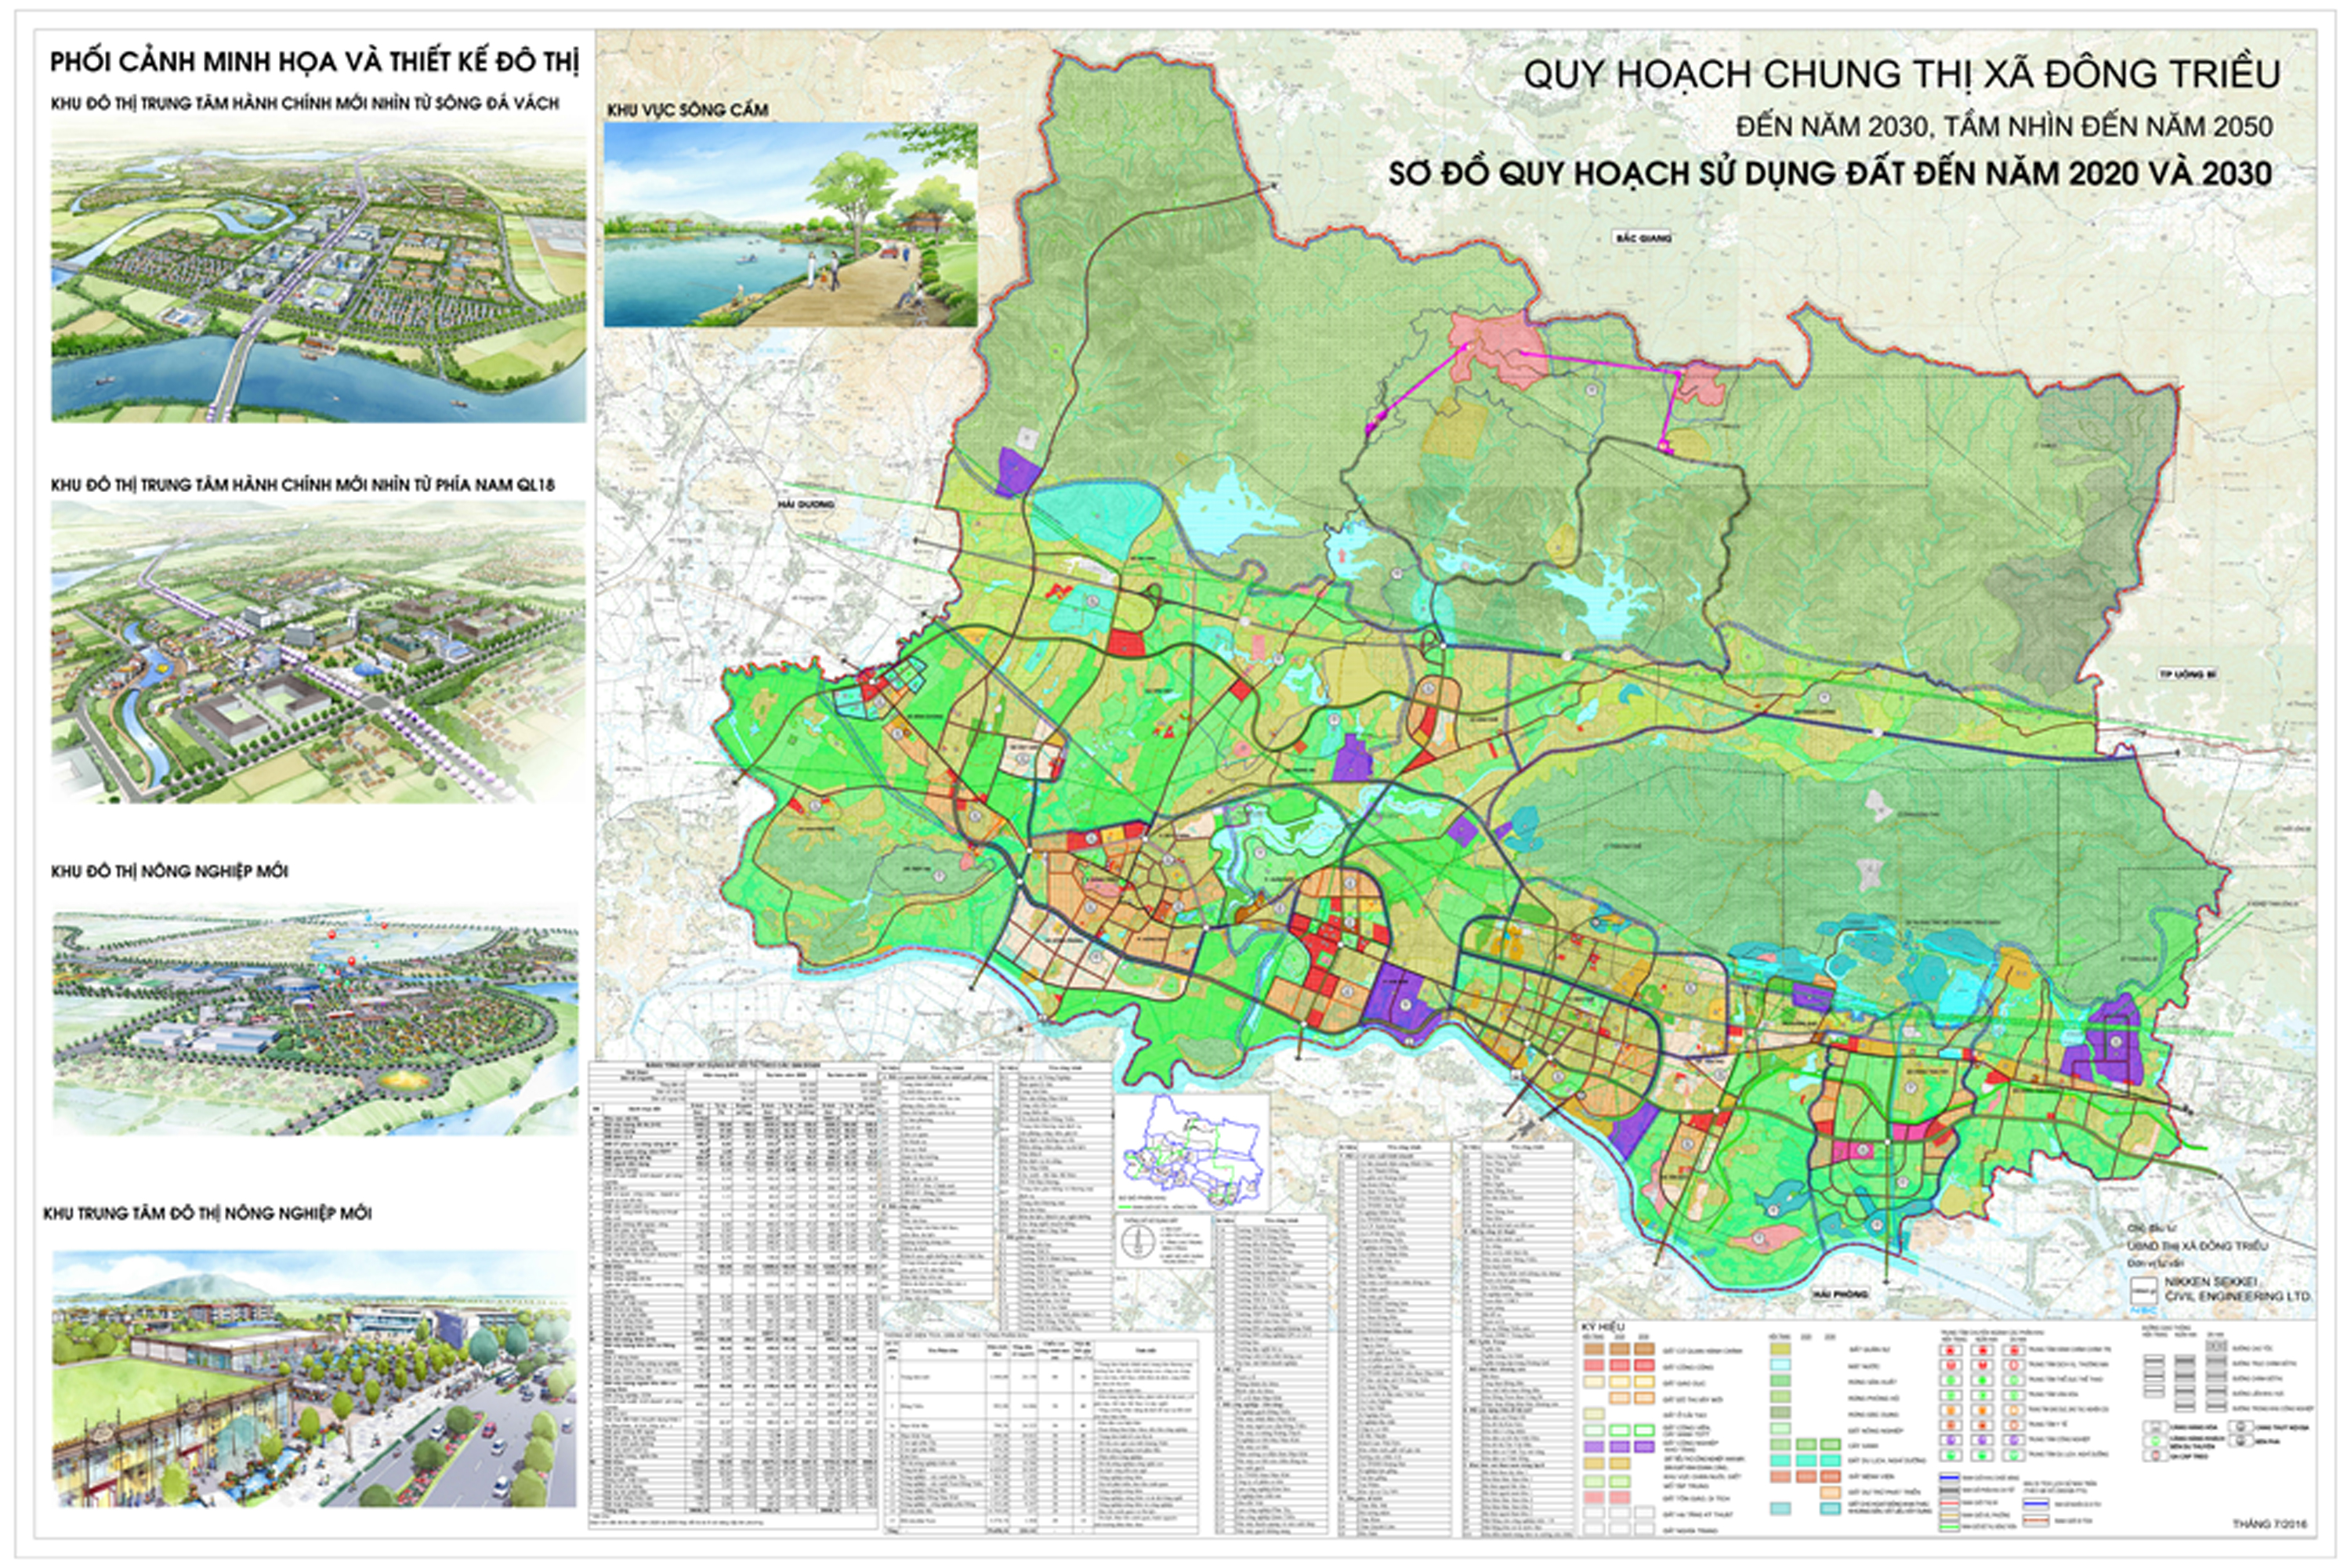 GENERAL PLANNING FOR CONSTRUCTION OF DONG TRIEU TOWN, QUANG NINH PROVINCE, TILL 2030 VISION TO 2050